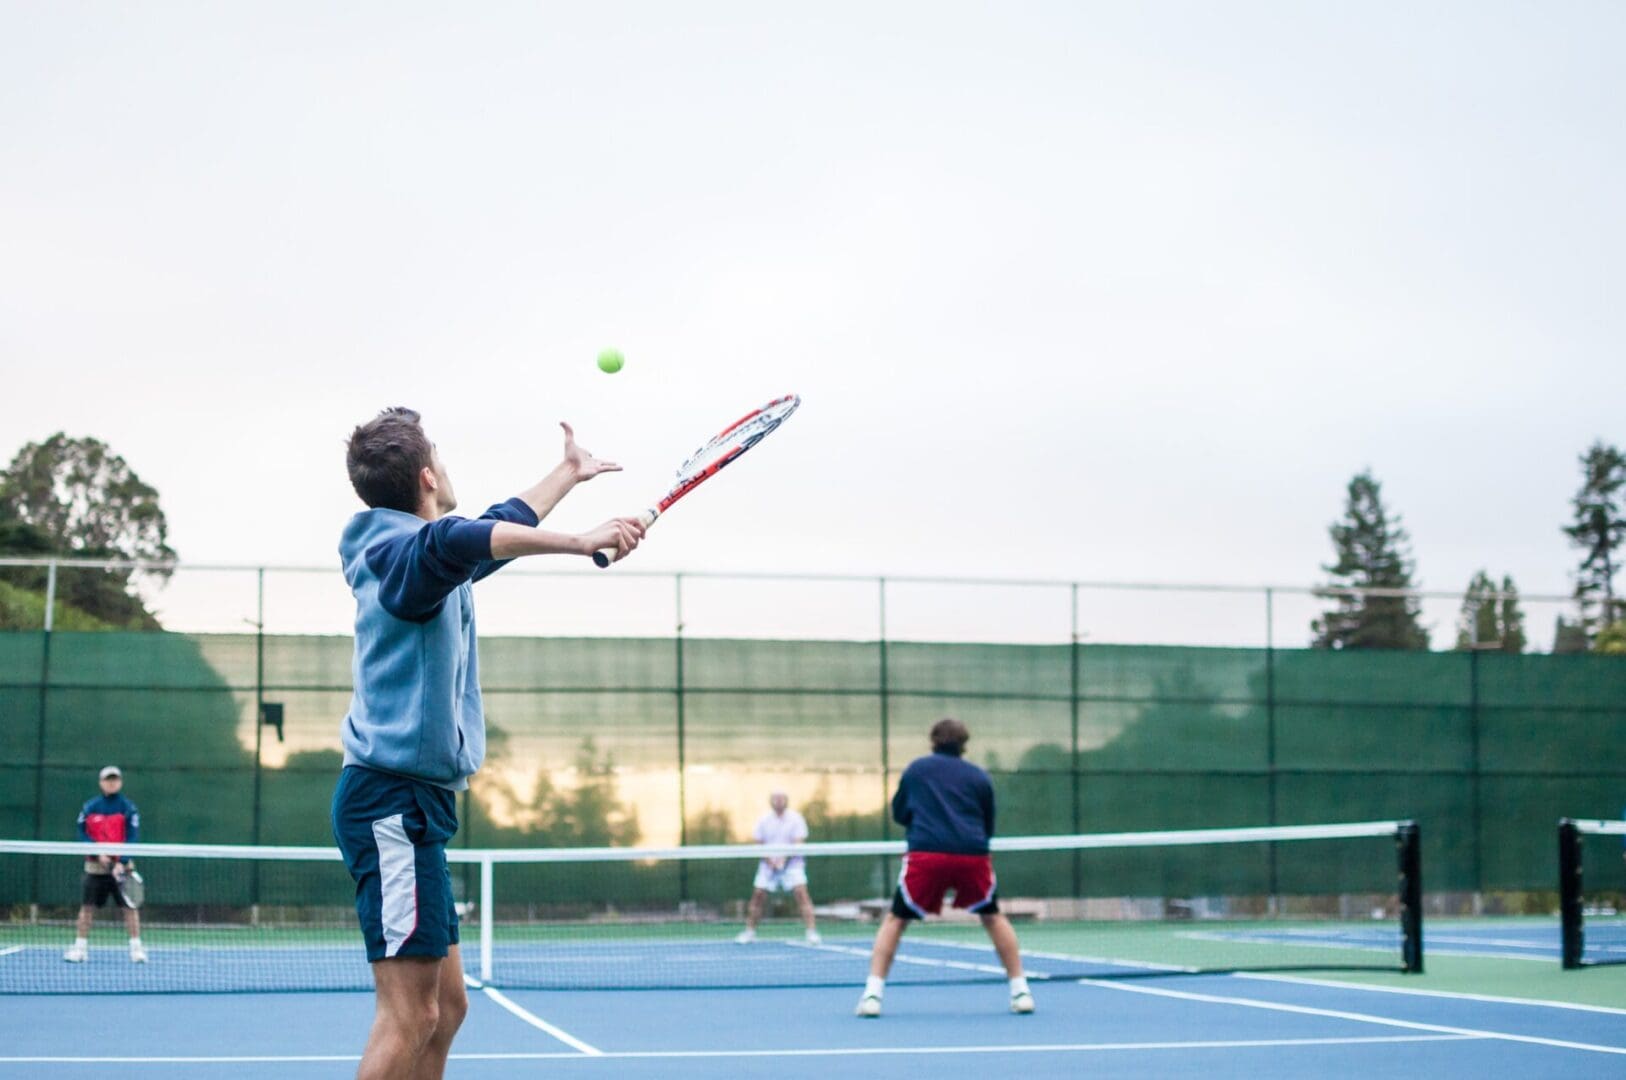 A person playing tennis with other players in the court